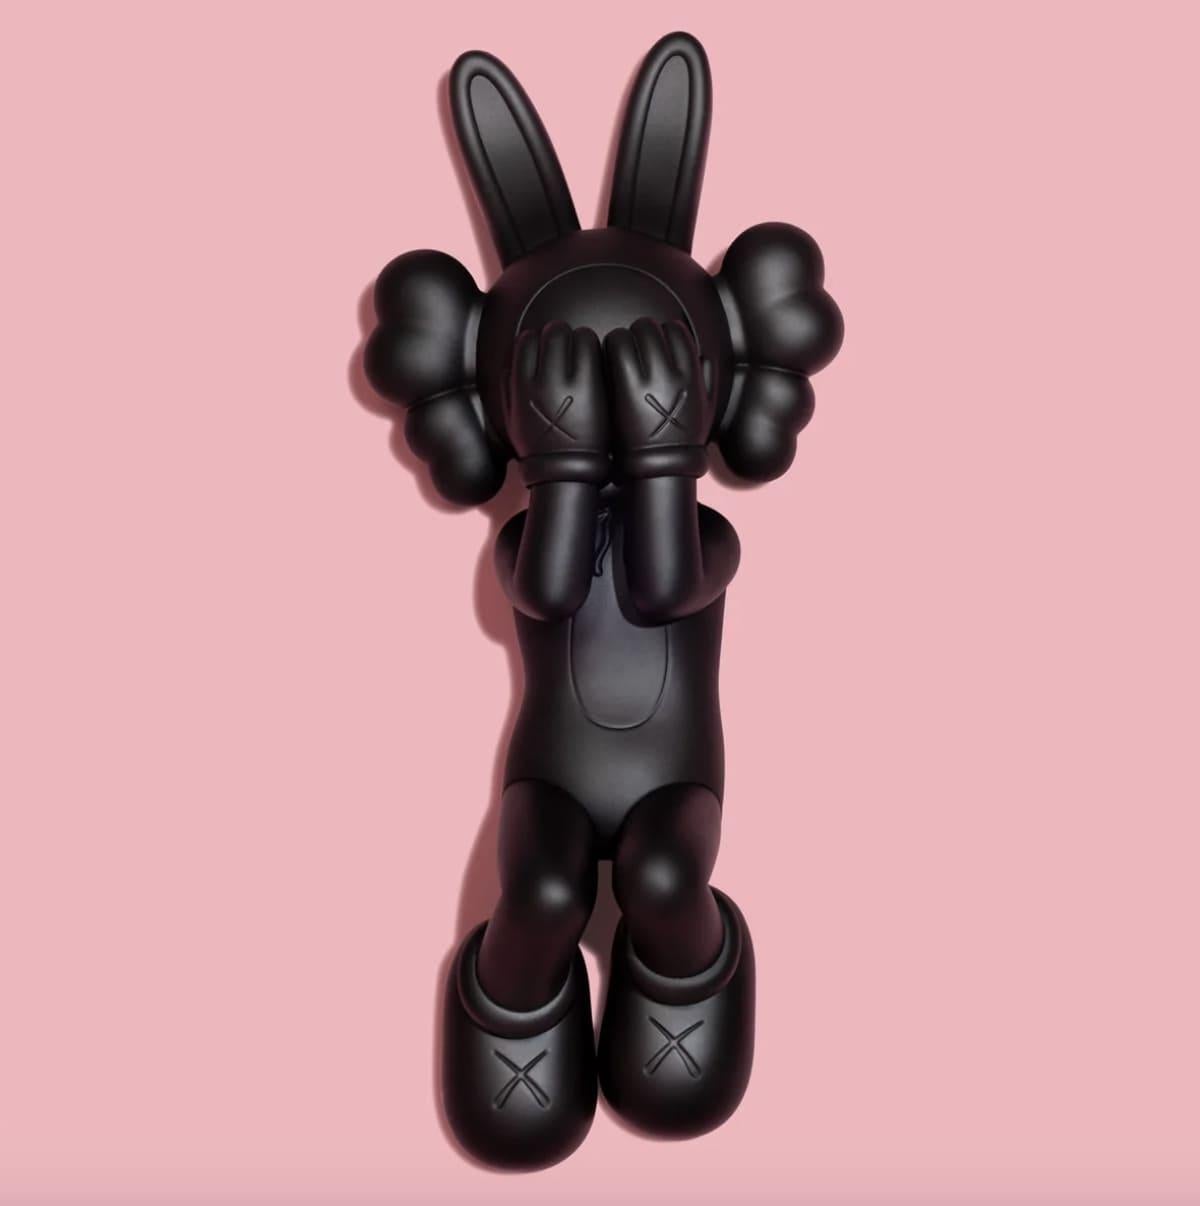 HOLIDAY INDONESIA - ACCOMPLICE Figure (Black) - Contemporary Sculpture by KAWS